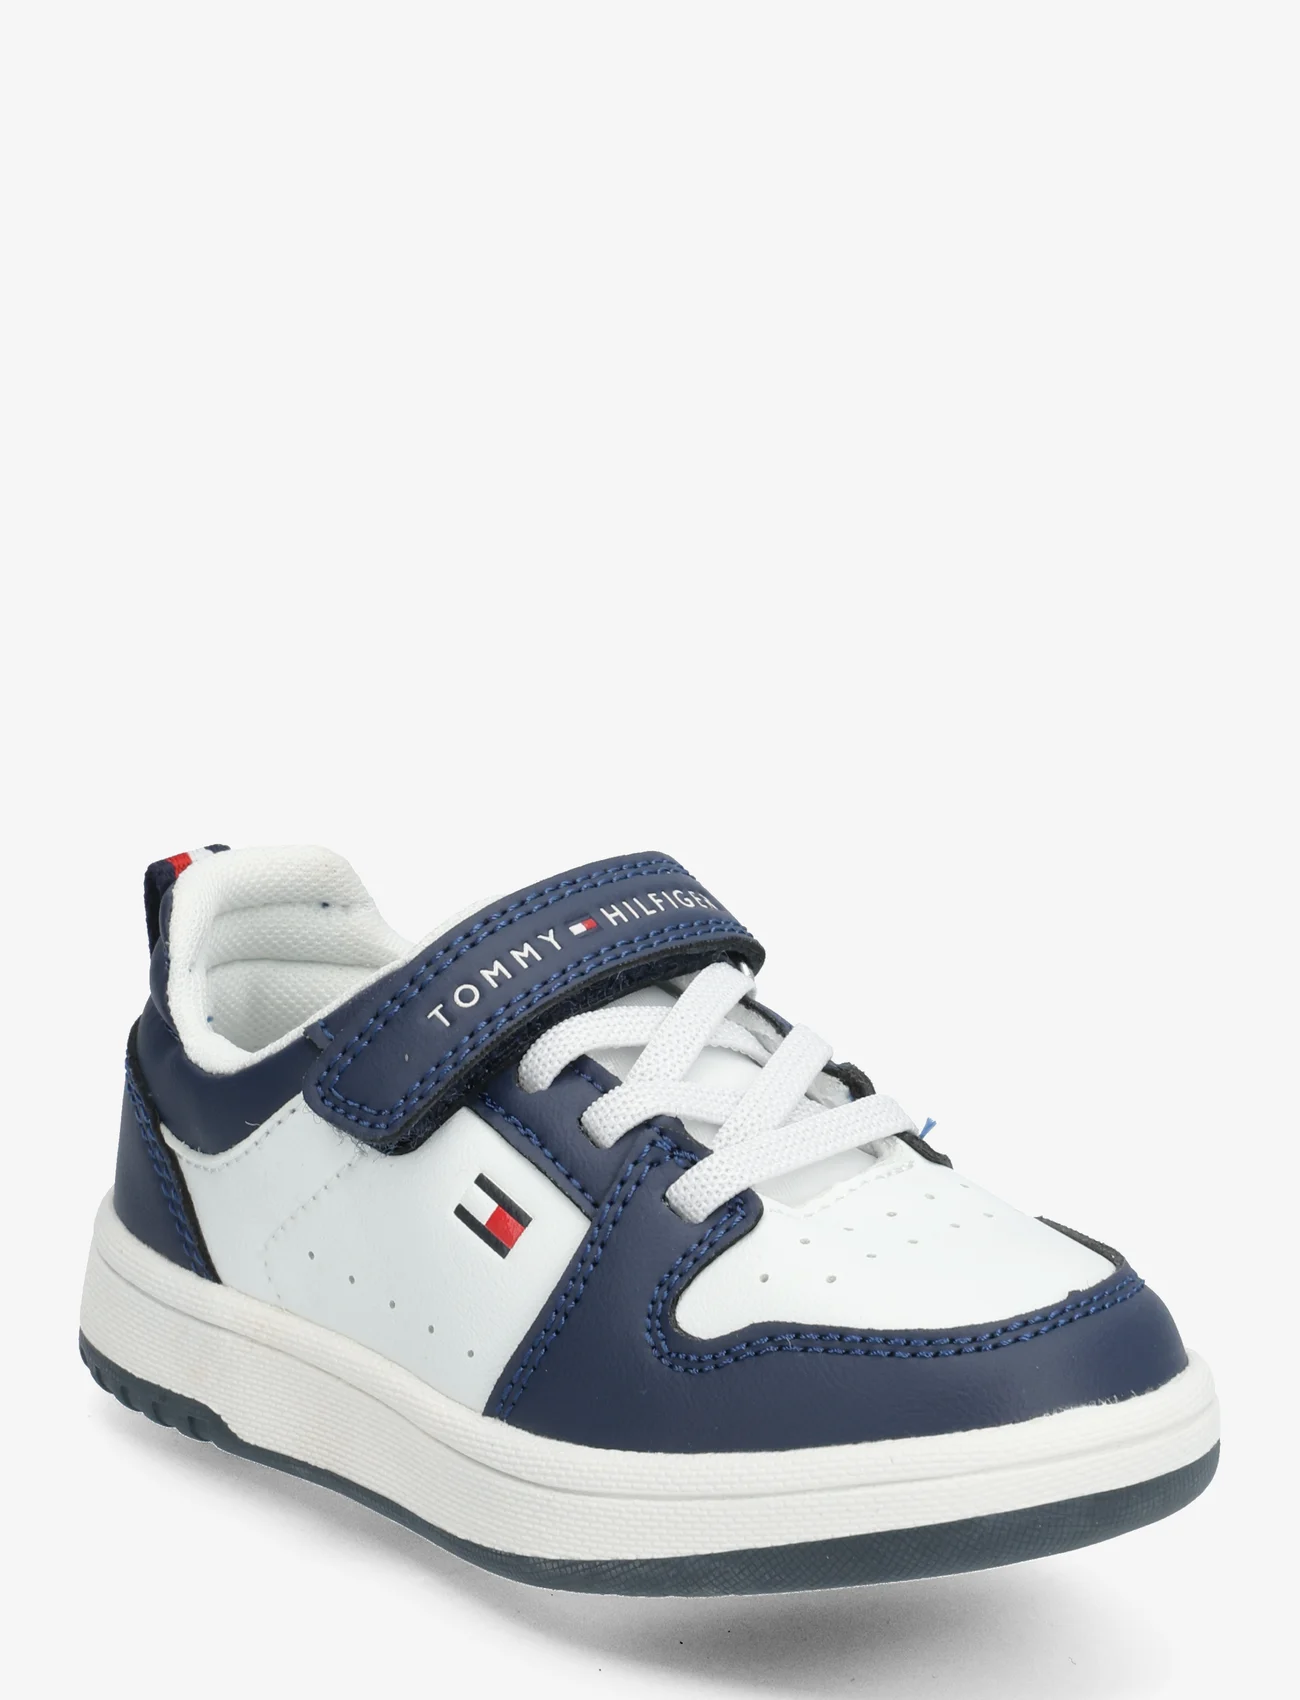 Tommy Hilfiger - LOW CUT LACE-UP/VELCRO SNEAKER - sommerschnäppchen - blue/white - 0